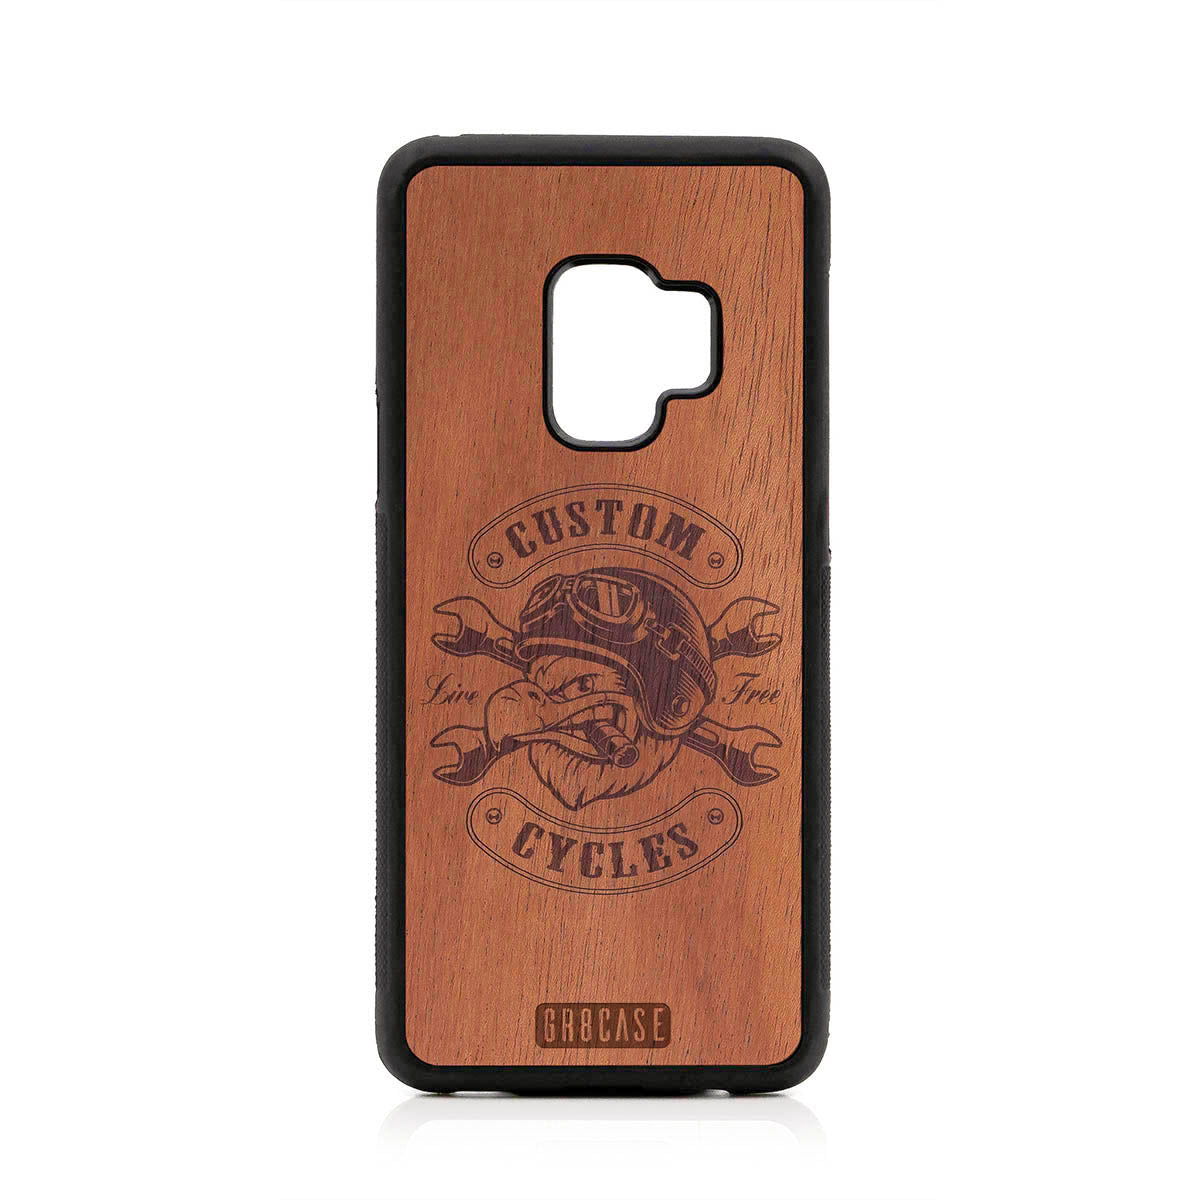 Custom Cycles Live Free (Biker Eagle) Design Wood Case For Samsung Galaxy S9 by GR8CASE